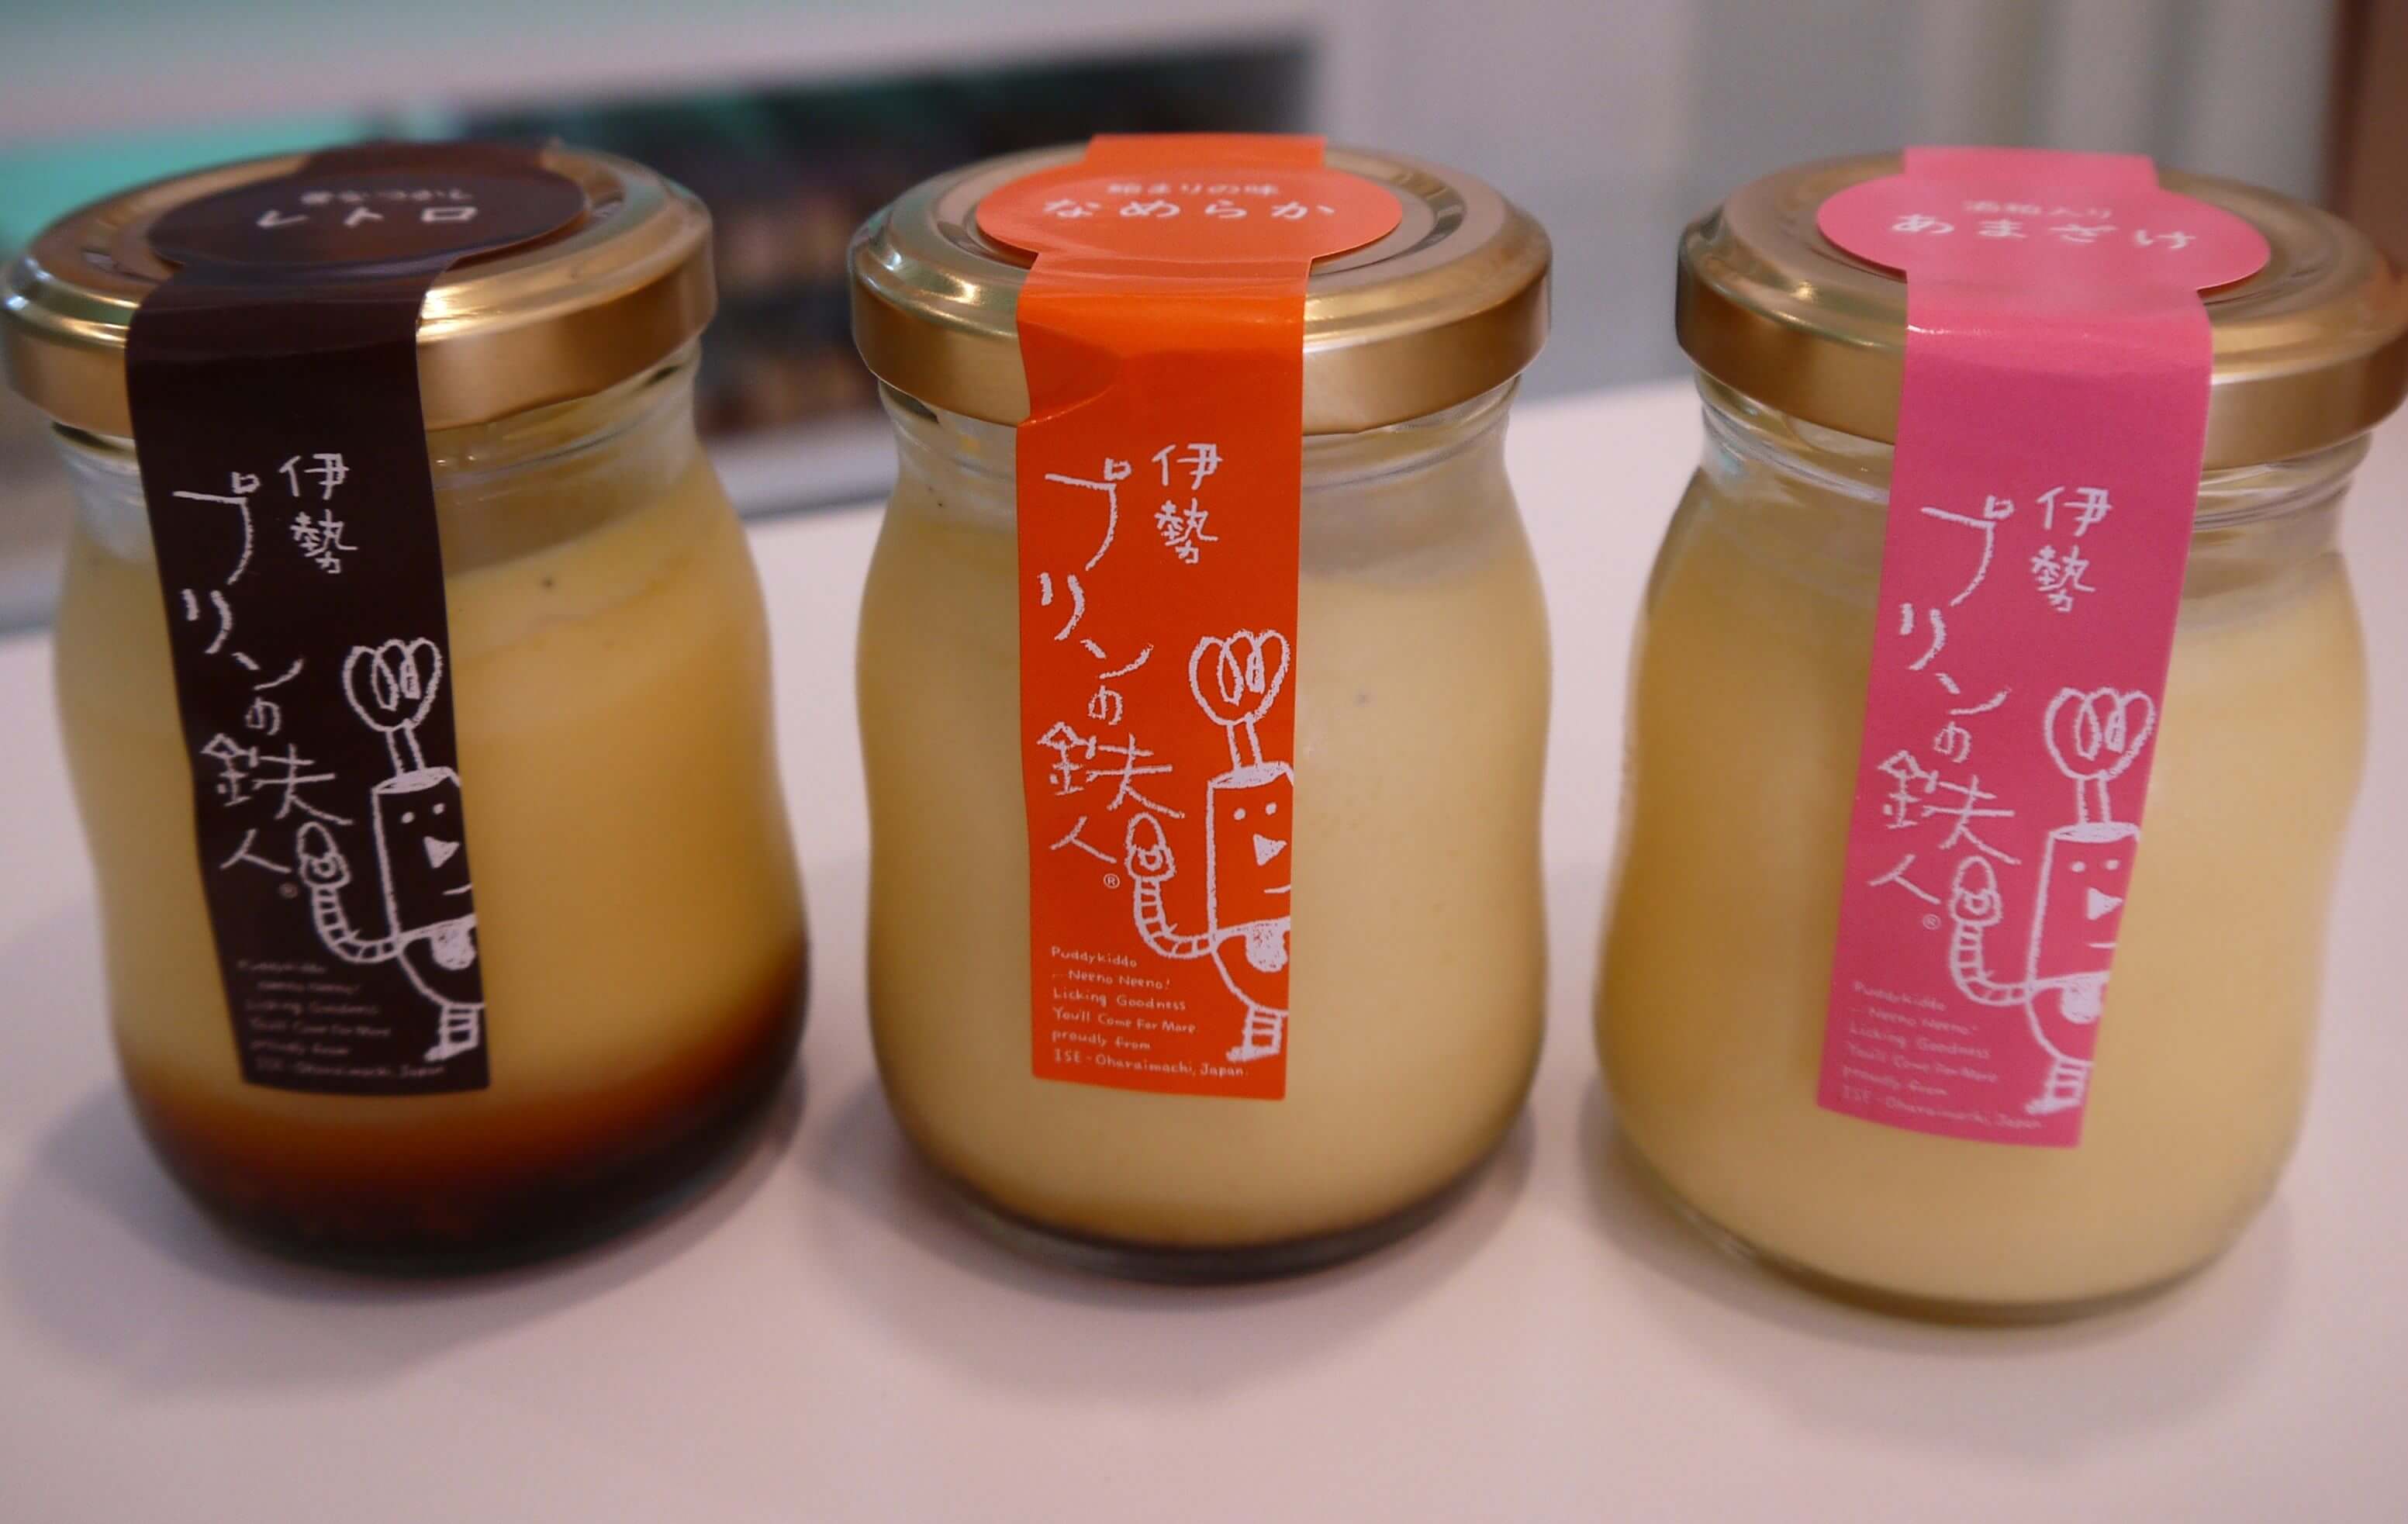 New Purin Shop ‘Ise Purin no Tetsujin’ Sells Japan’s First Purin Toast